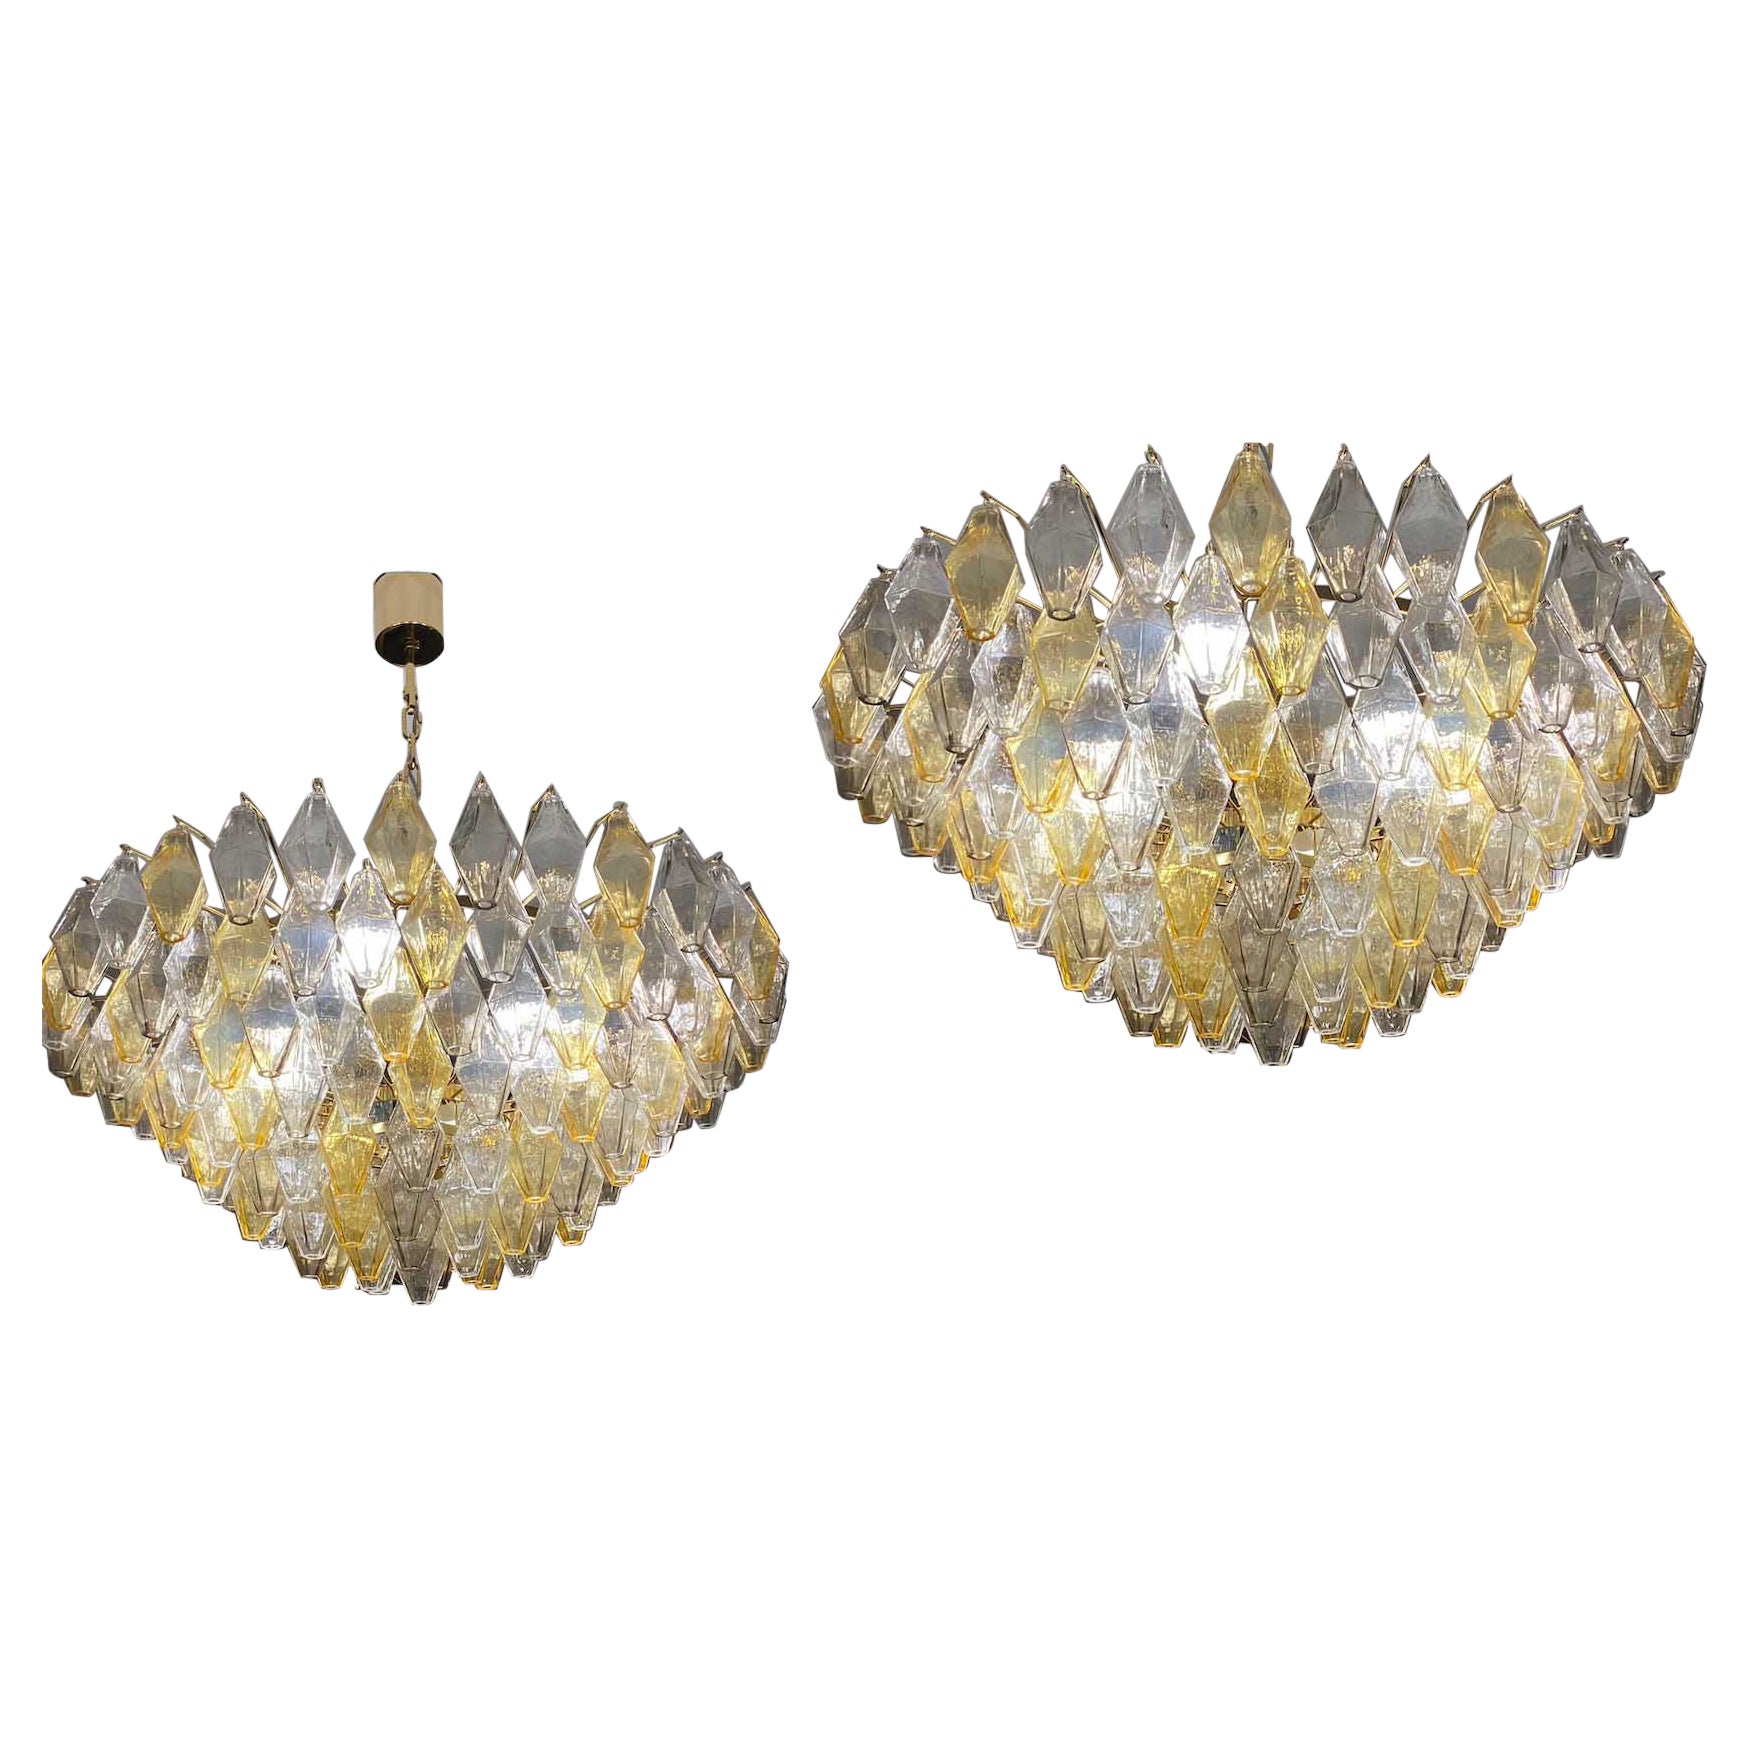 Amber an Grey Large Poliedri Murano Glass Chandelier or Ceiling Light For Sale